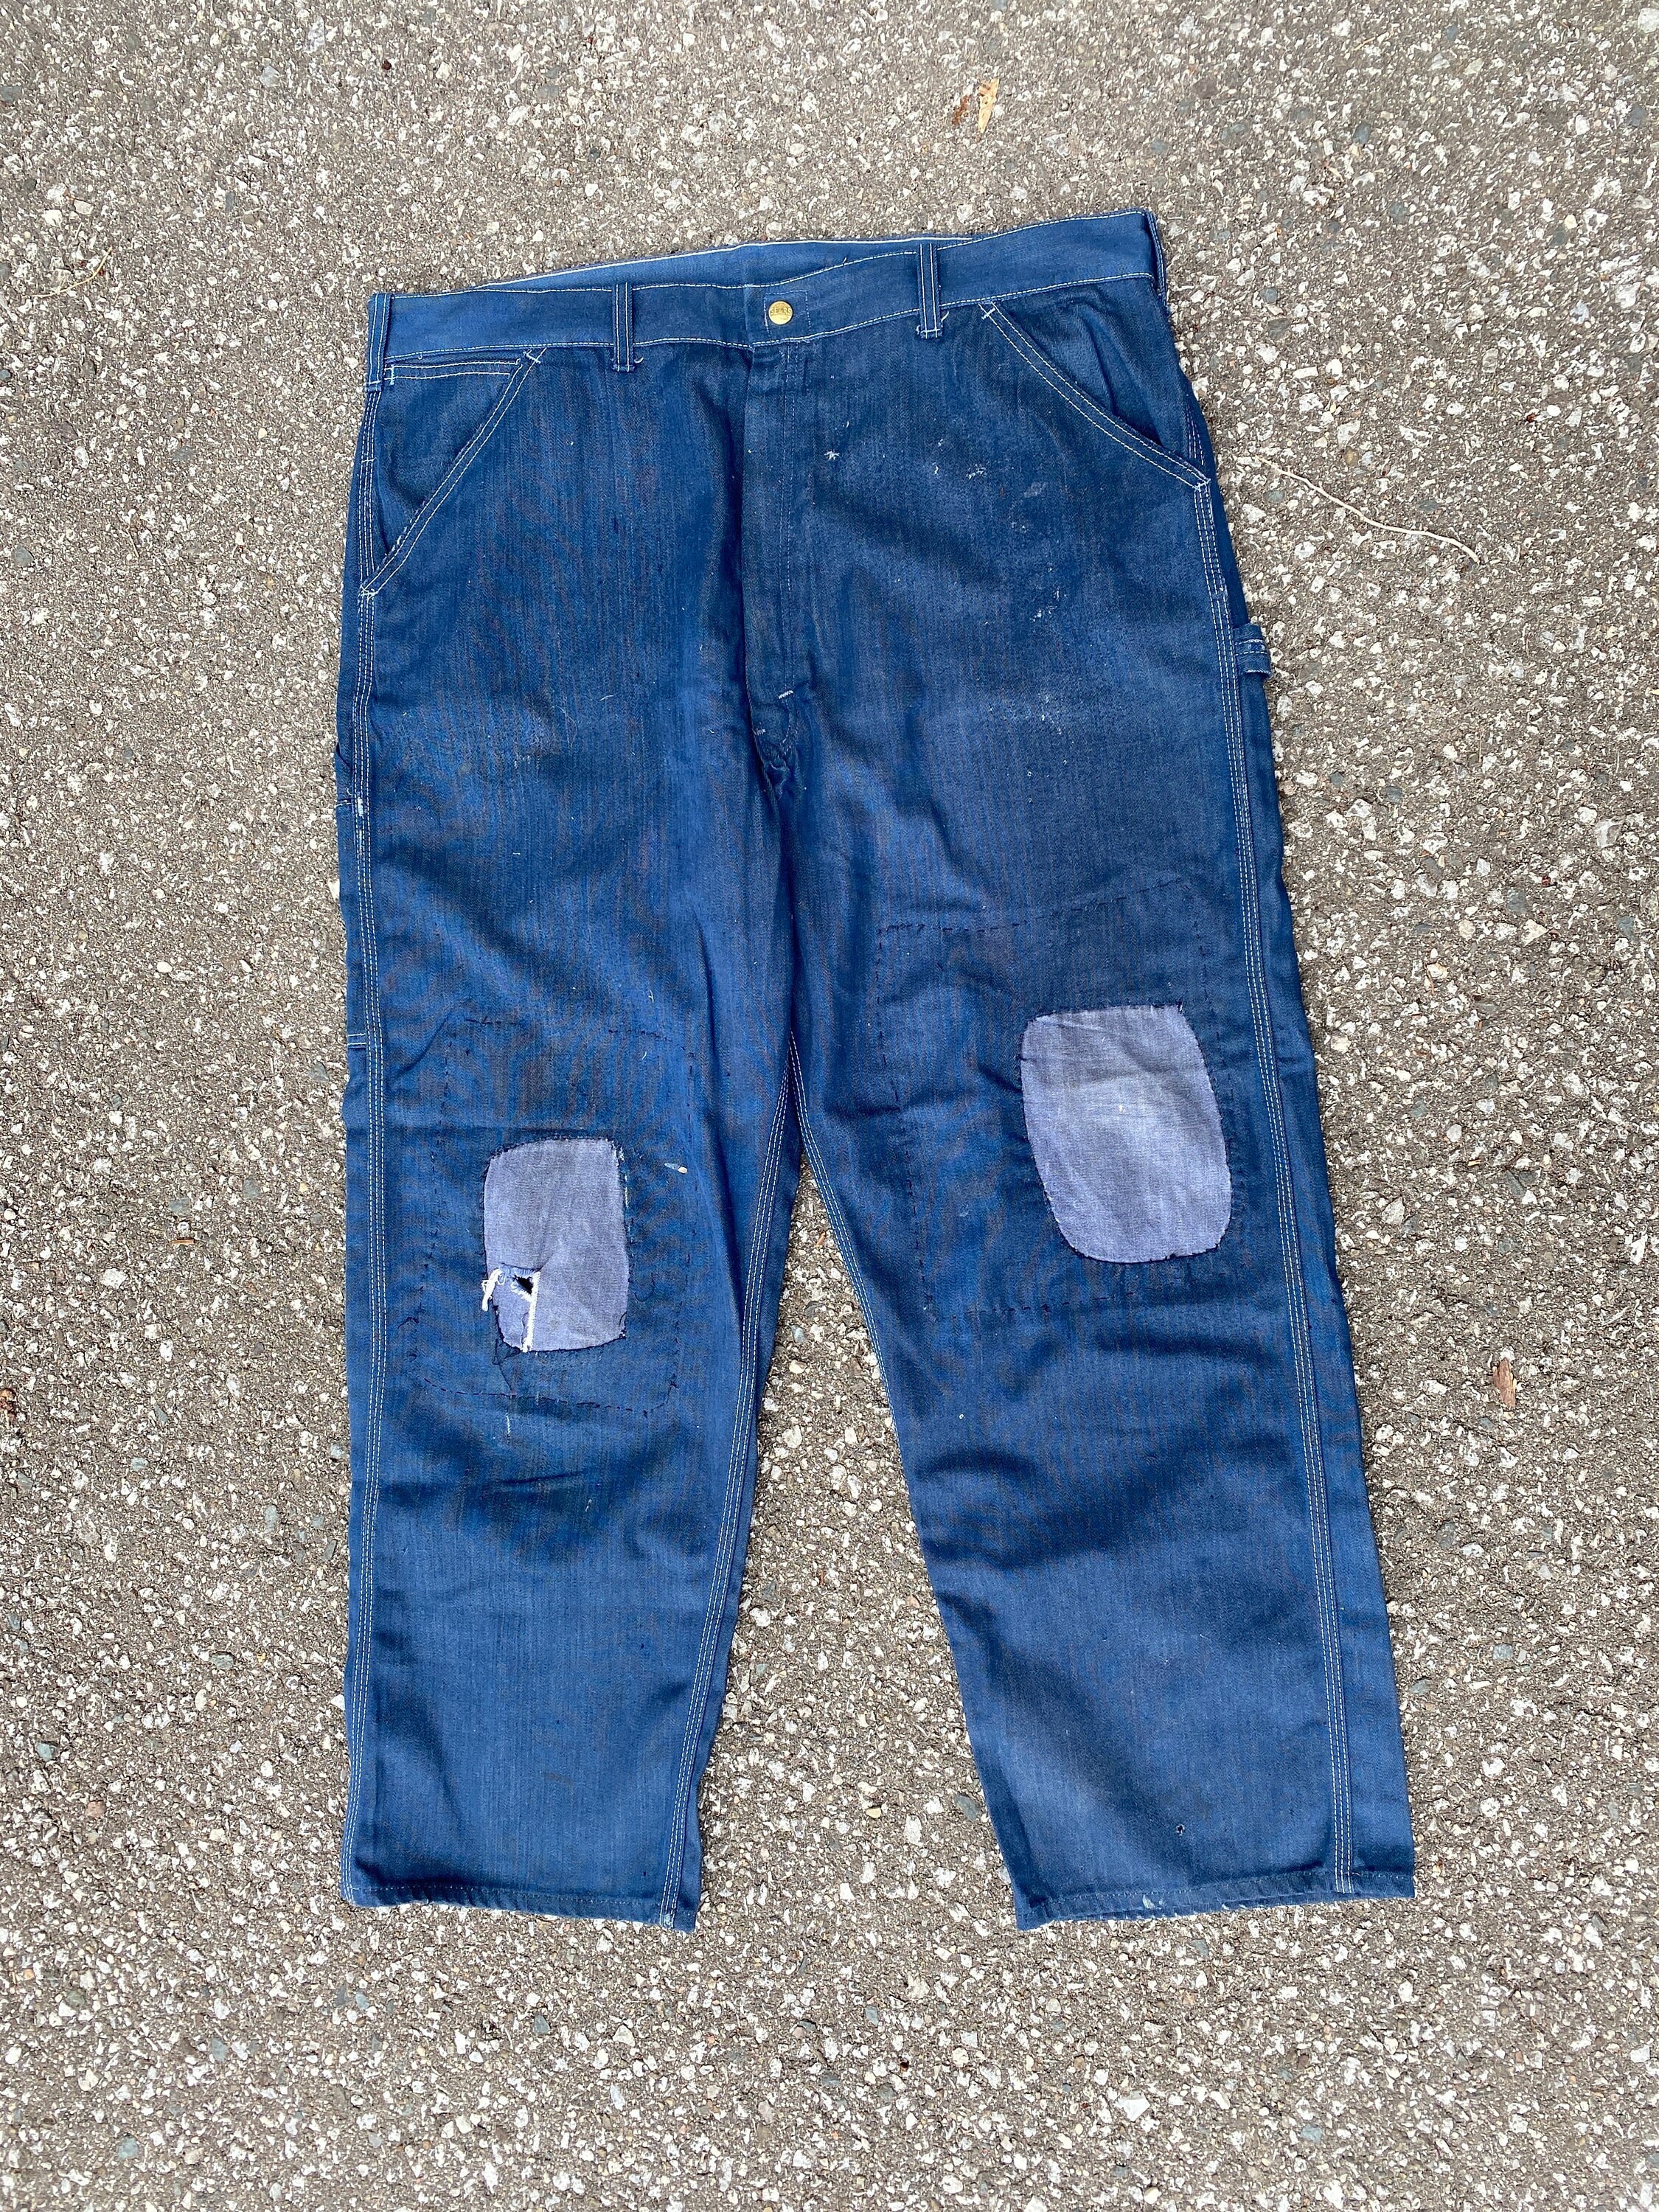 Denim Key Pants With Vintage Embroidered Patches, Size 34